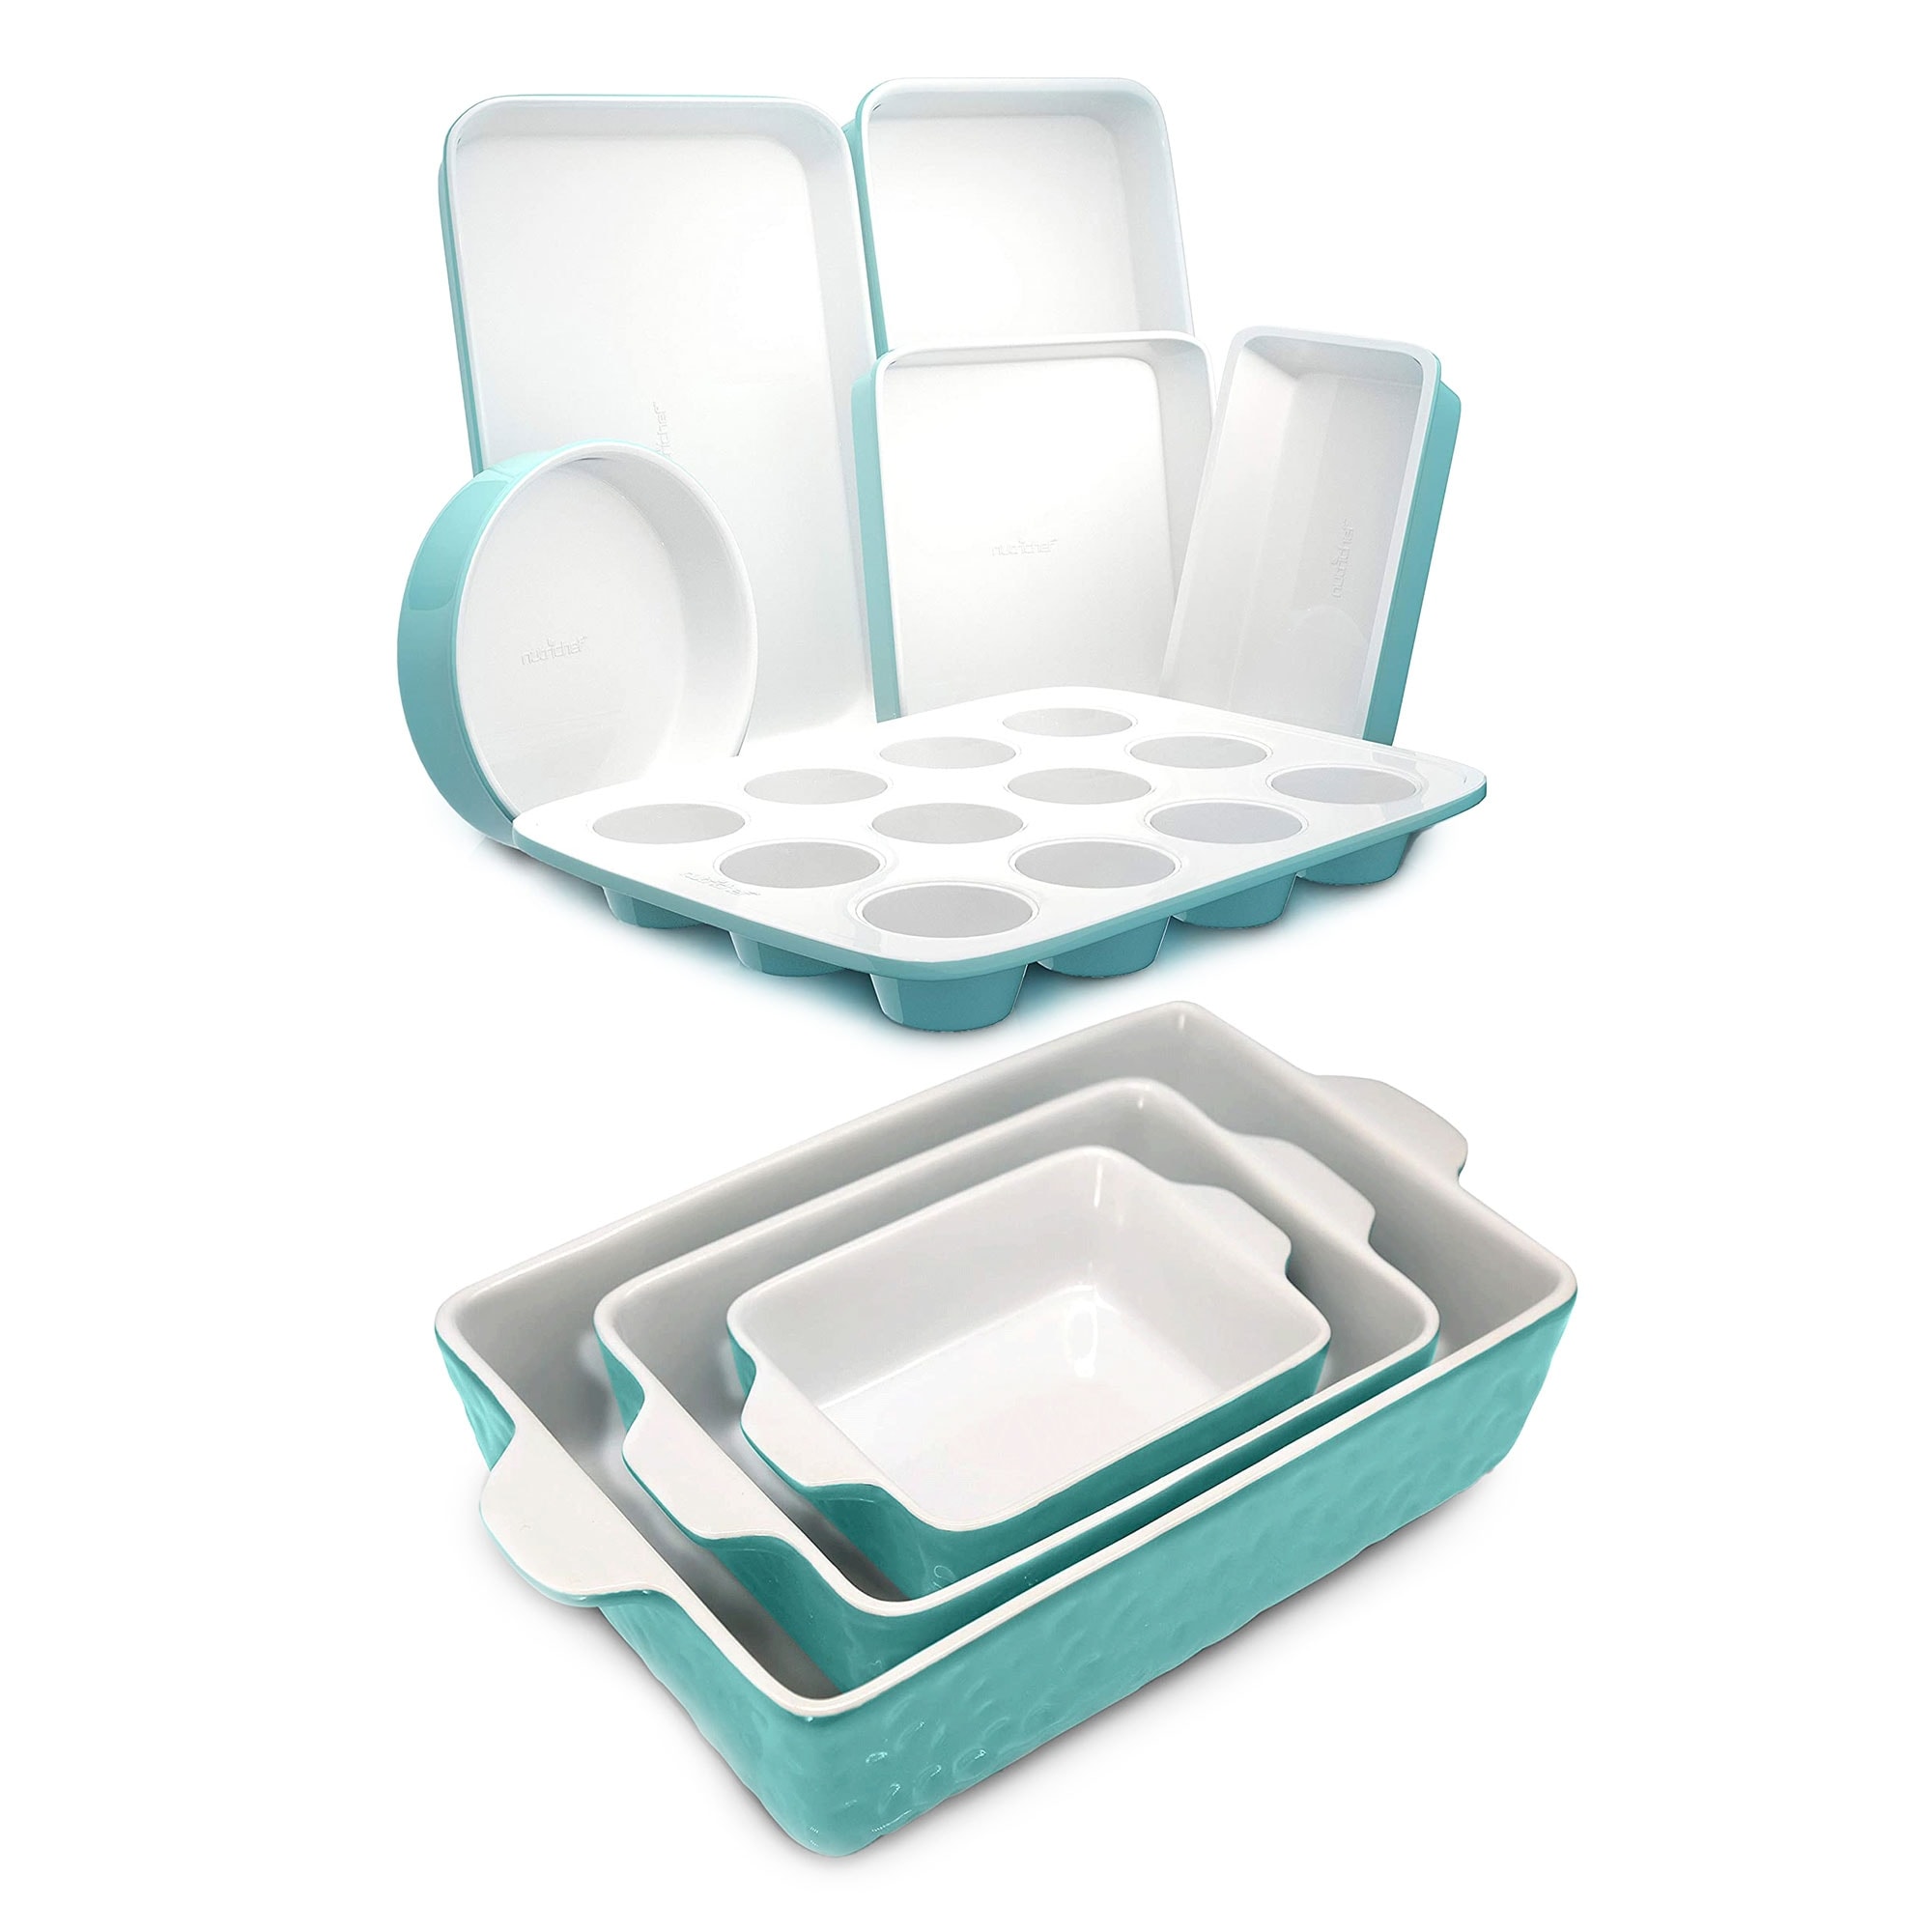 https://ak1.ostkcdn.com/images/products/is/images/direct/7d3e74174d43bf81cba71f8abfbe88aff9f4435b/NutriChef-Ceramic-3-Piece-Nonstick-Kitchen-Bakeware-Set-w--Stackable-Baking-Pans.jpg